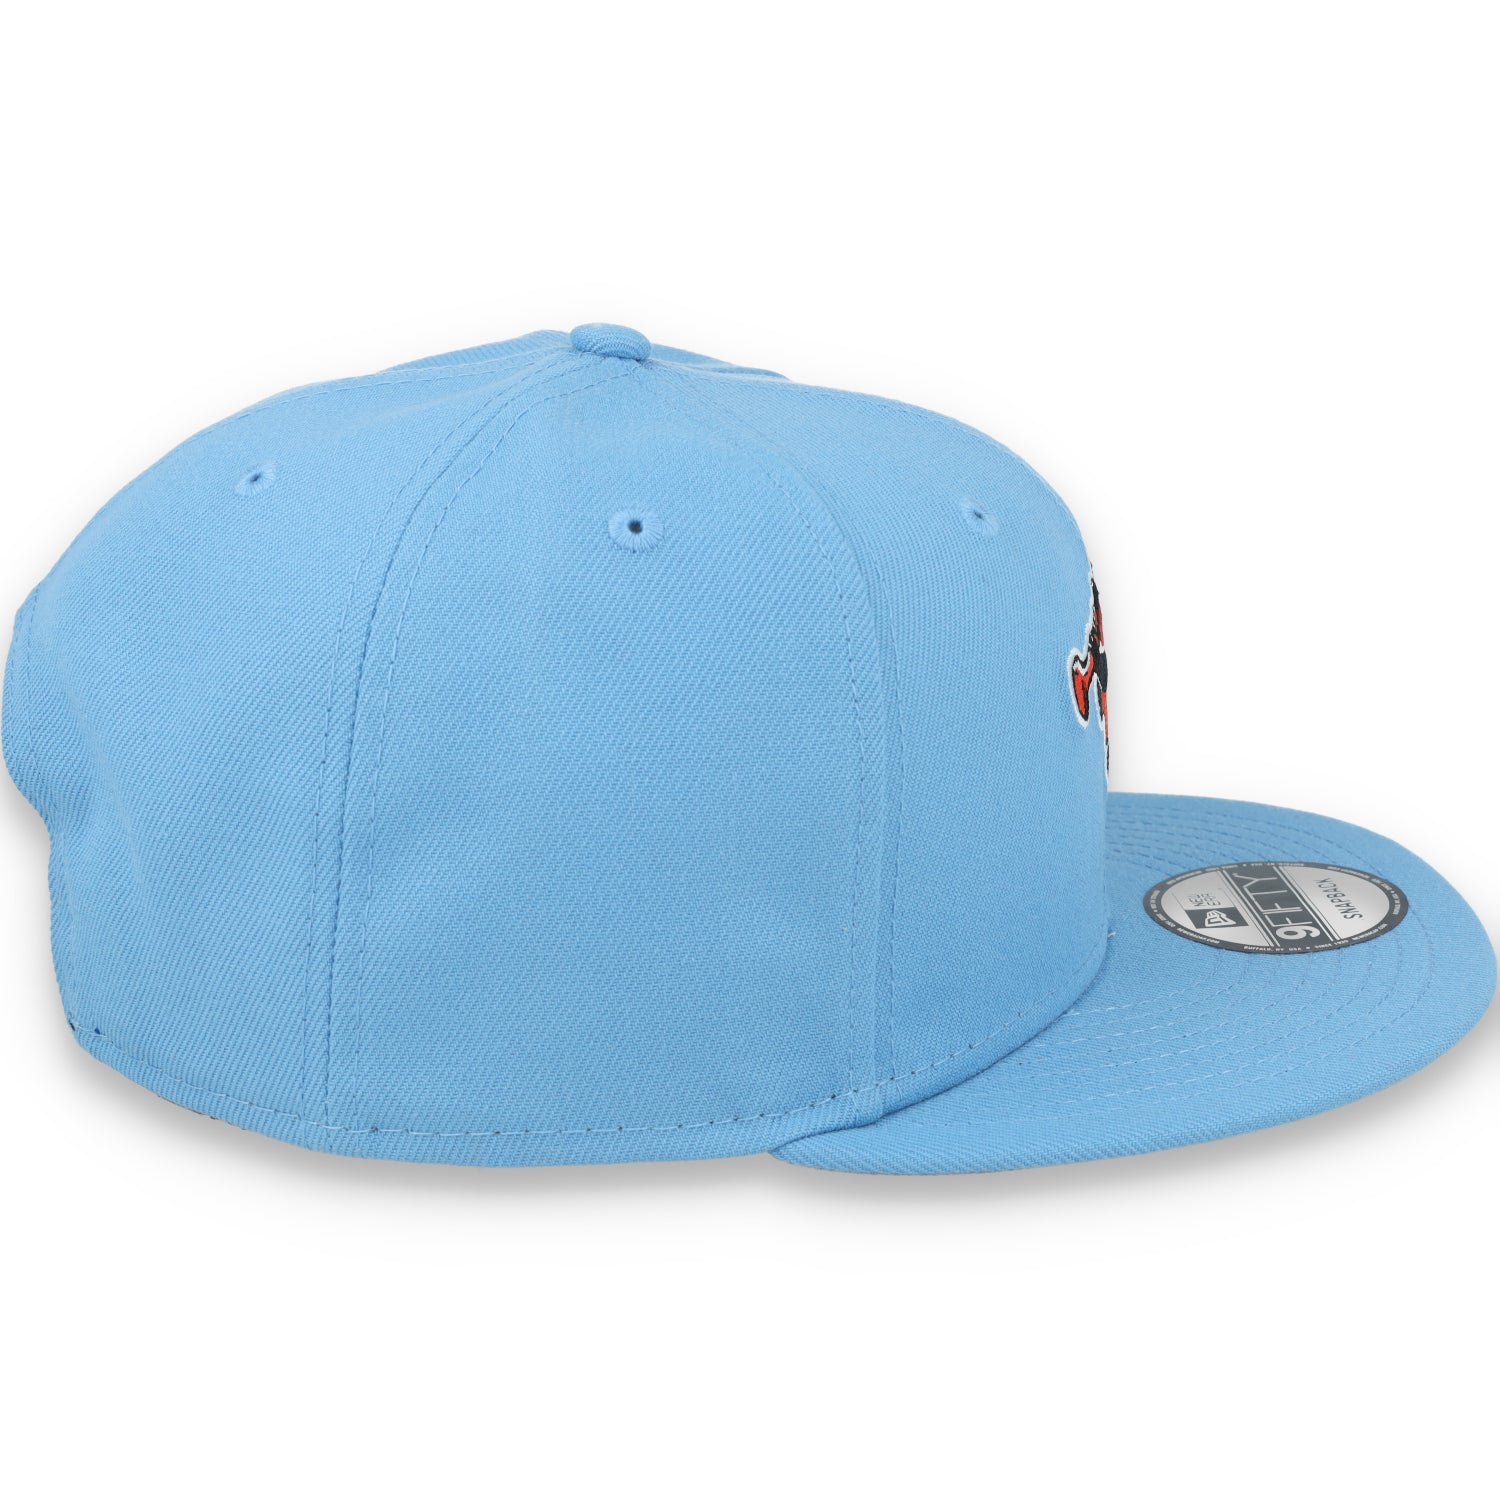 New Era  Baltimore Orioles Cooperstown Evergreen 9FIFTY Snapback Hat - Sky Blue